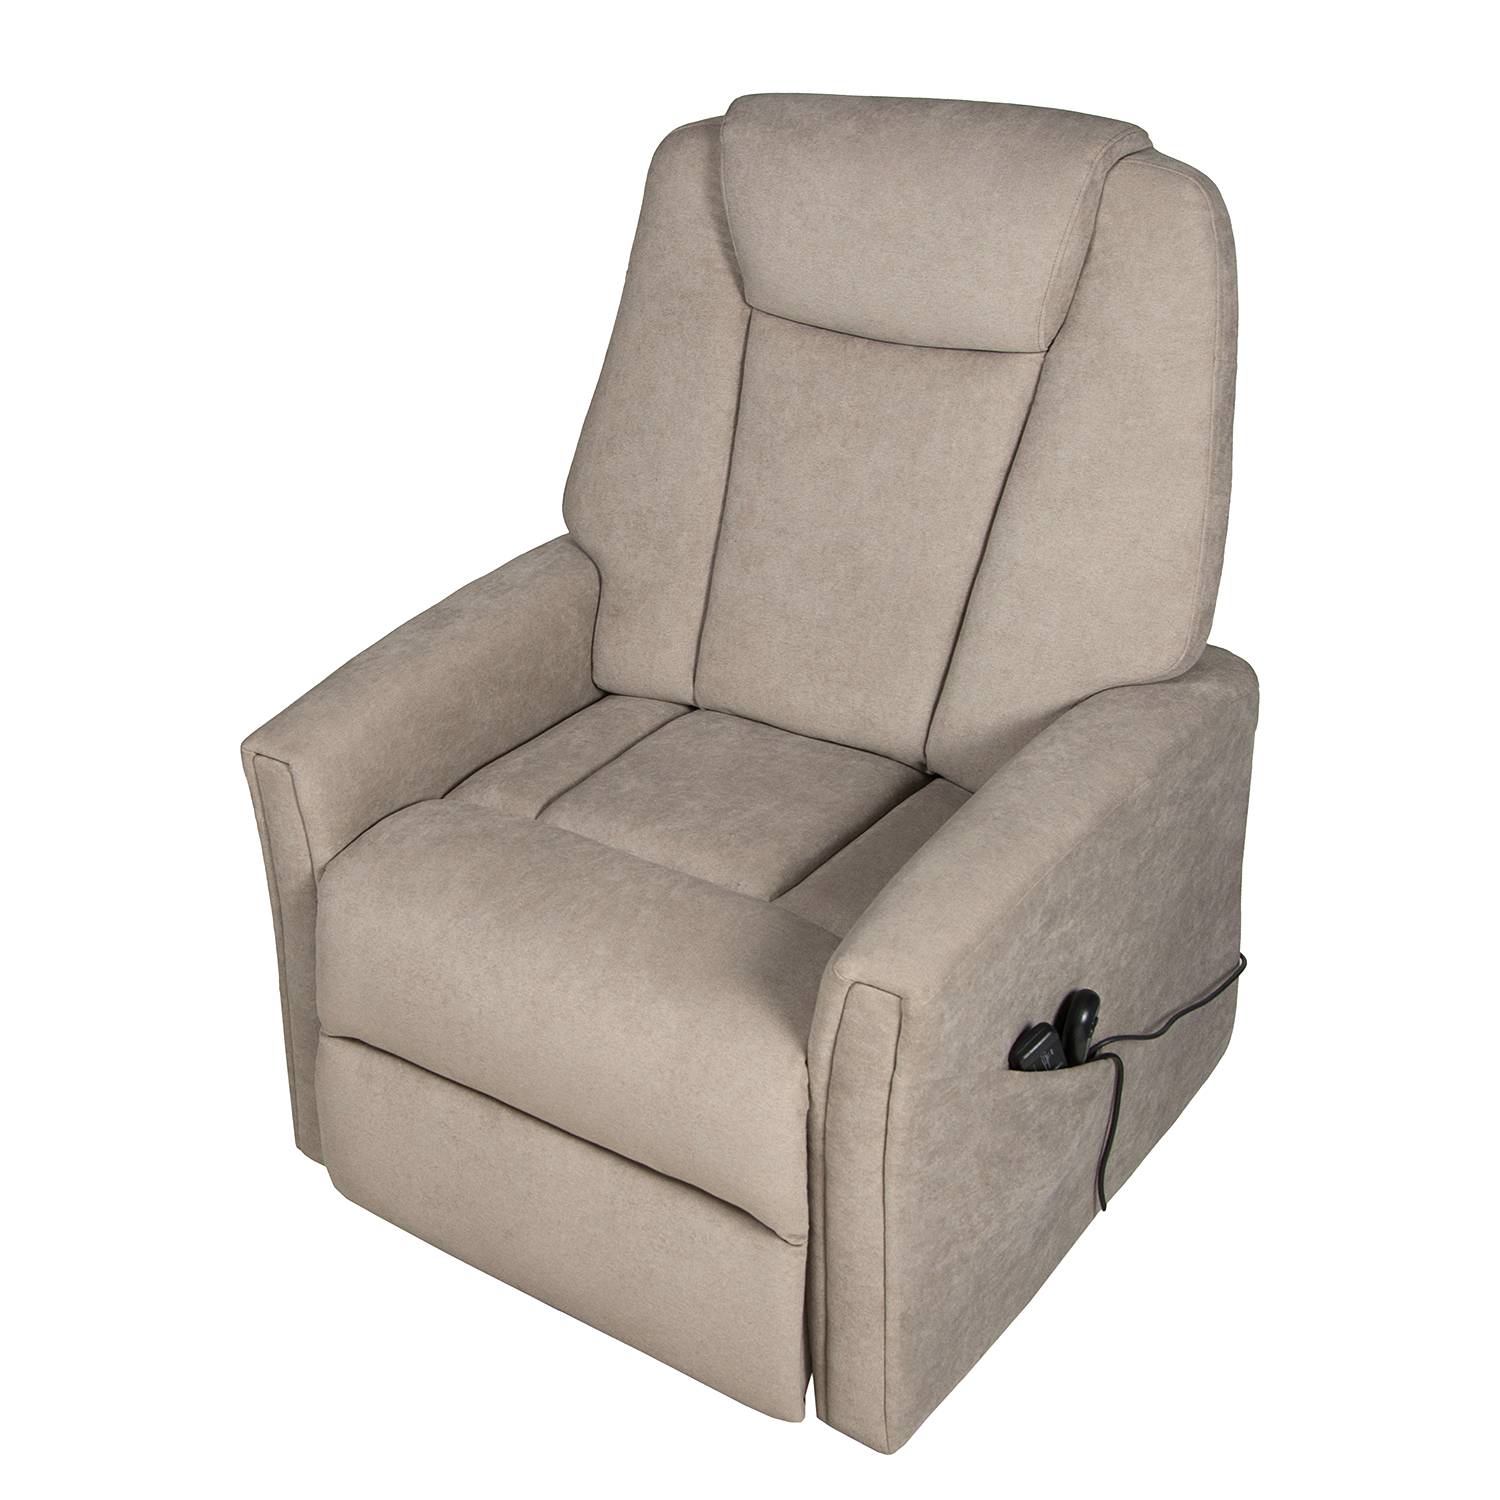 Image of Fauteuil de relaxation Montry 000000001000210763